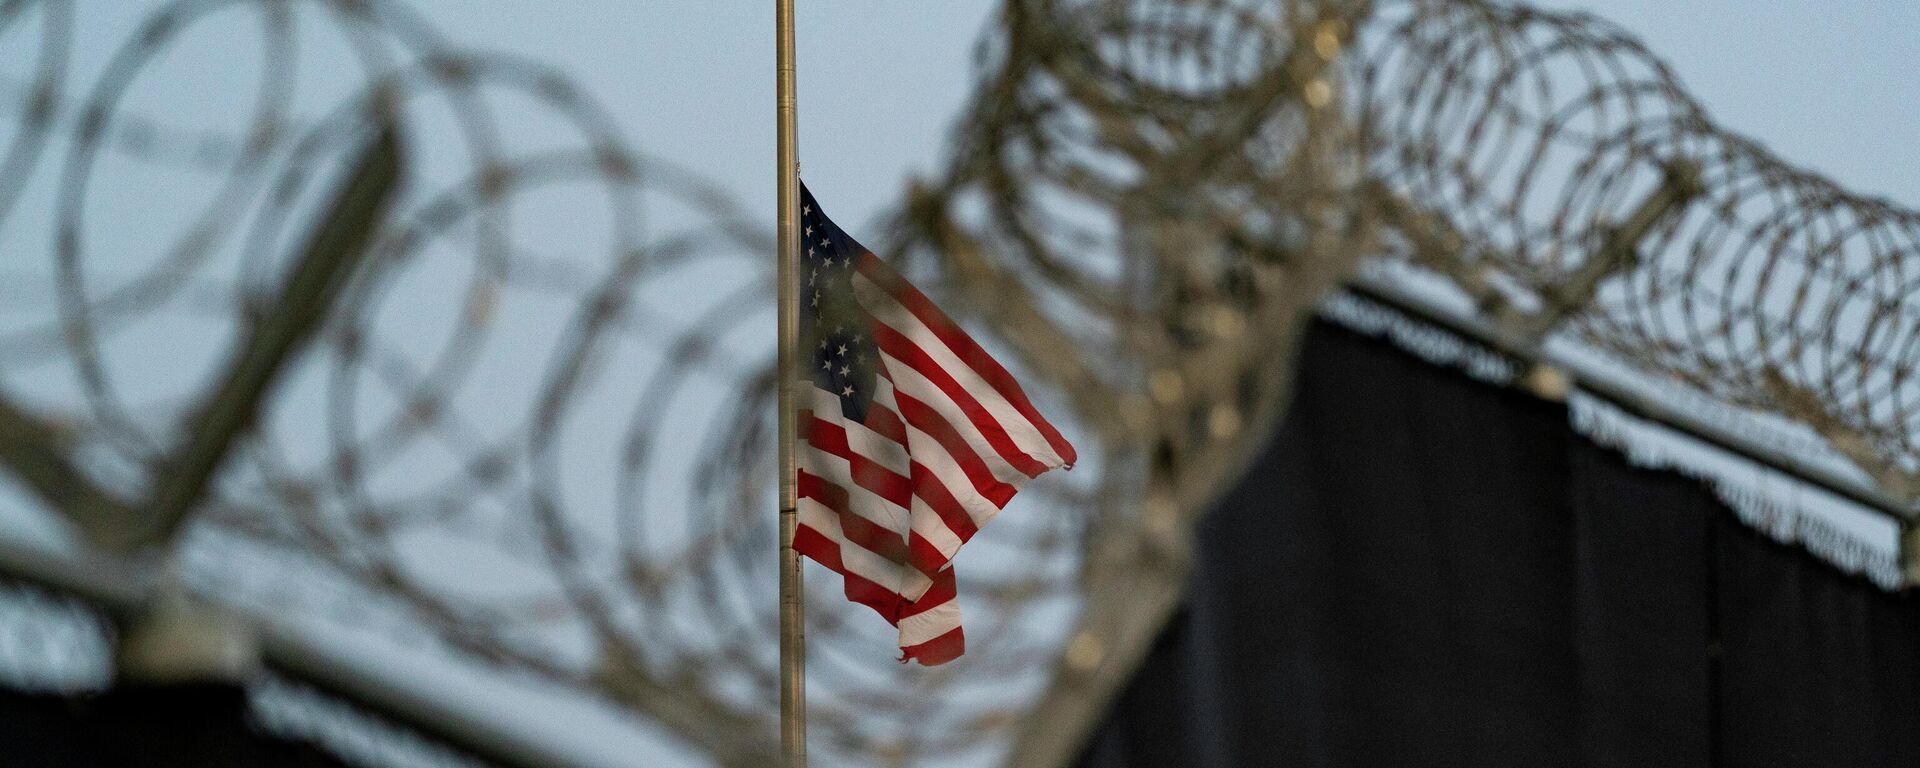 In this Aug. 29, 2021, file photo reviewed by U.S. military officials, a flag flies at half-staff in honor of the U.S. service members and other victims killed in the terrorist attack in Kabul, Afghanistan, as seen from Camp Justice in Guantanamo Bay Naval Base, Cuba. - Sputnik International, 1920, 07.06.2022